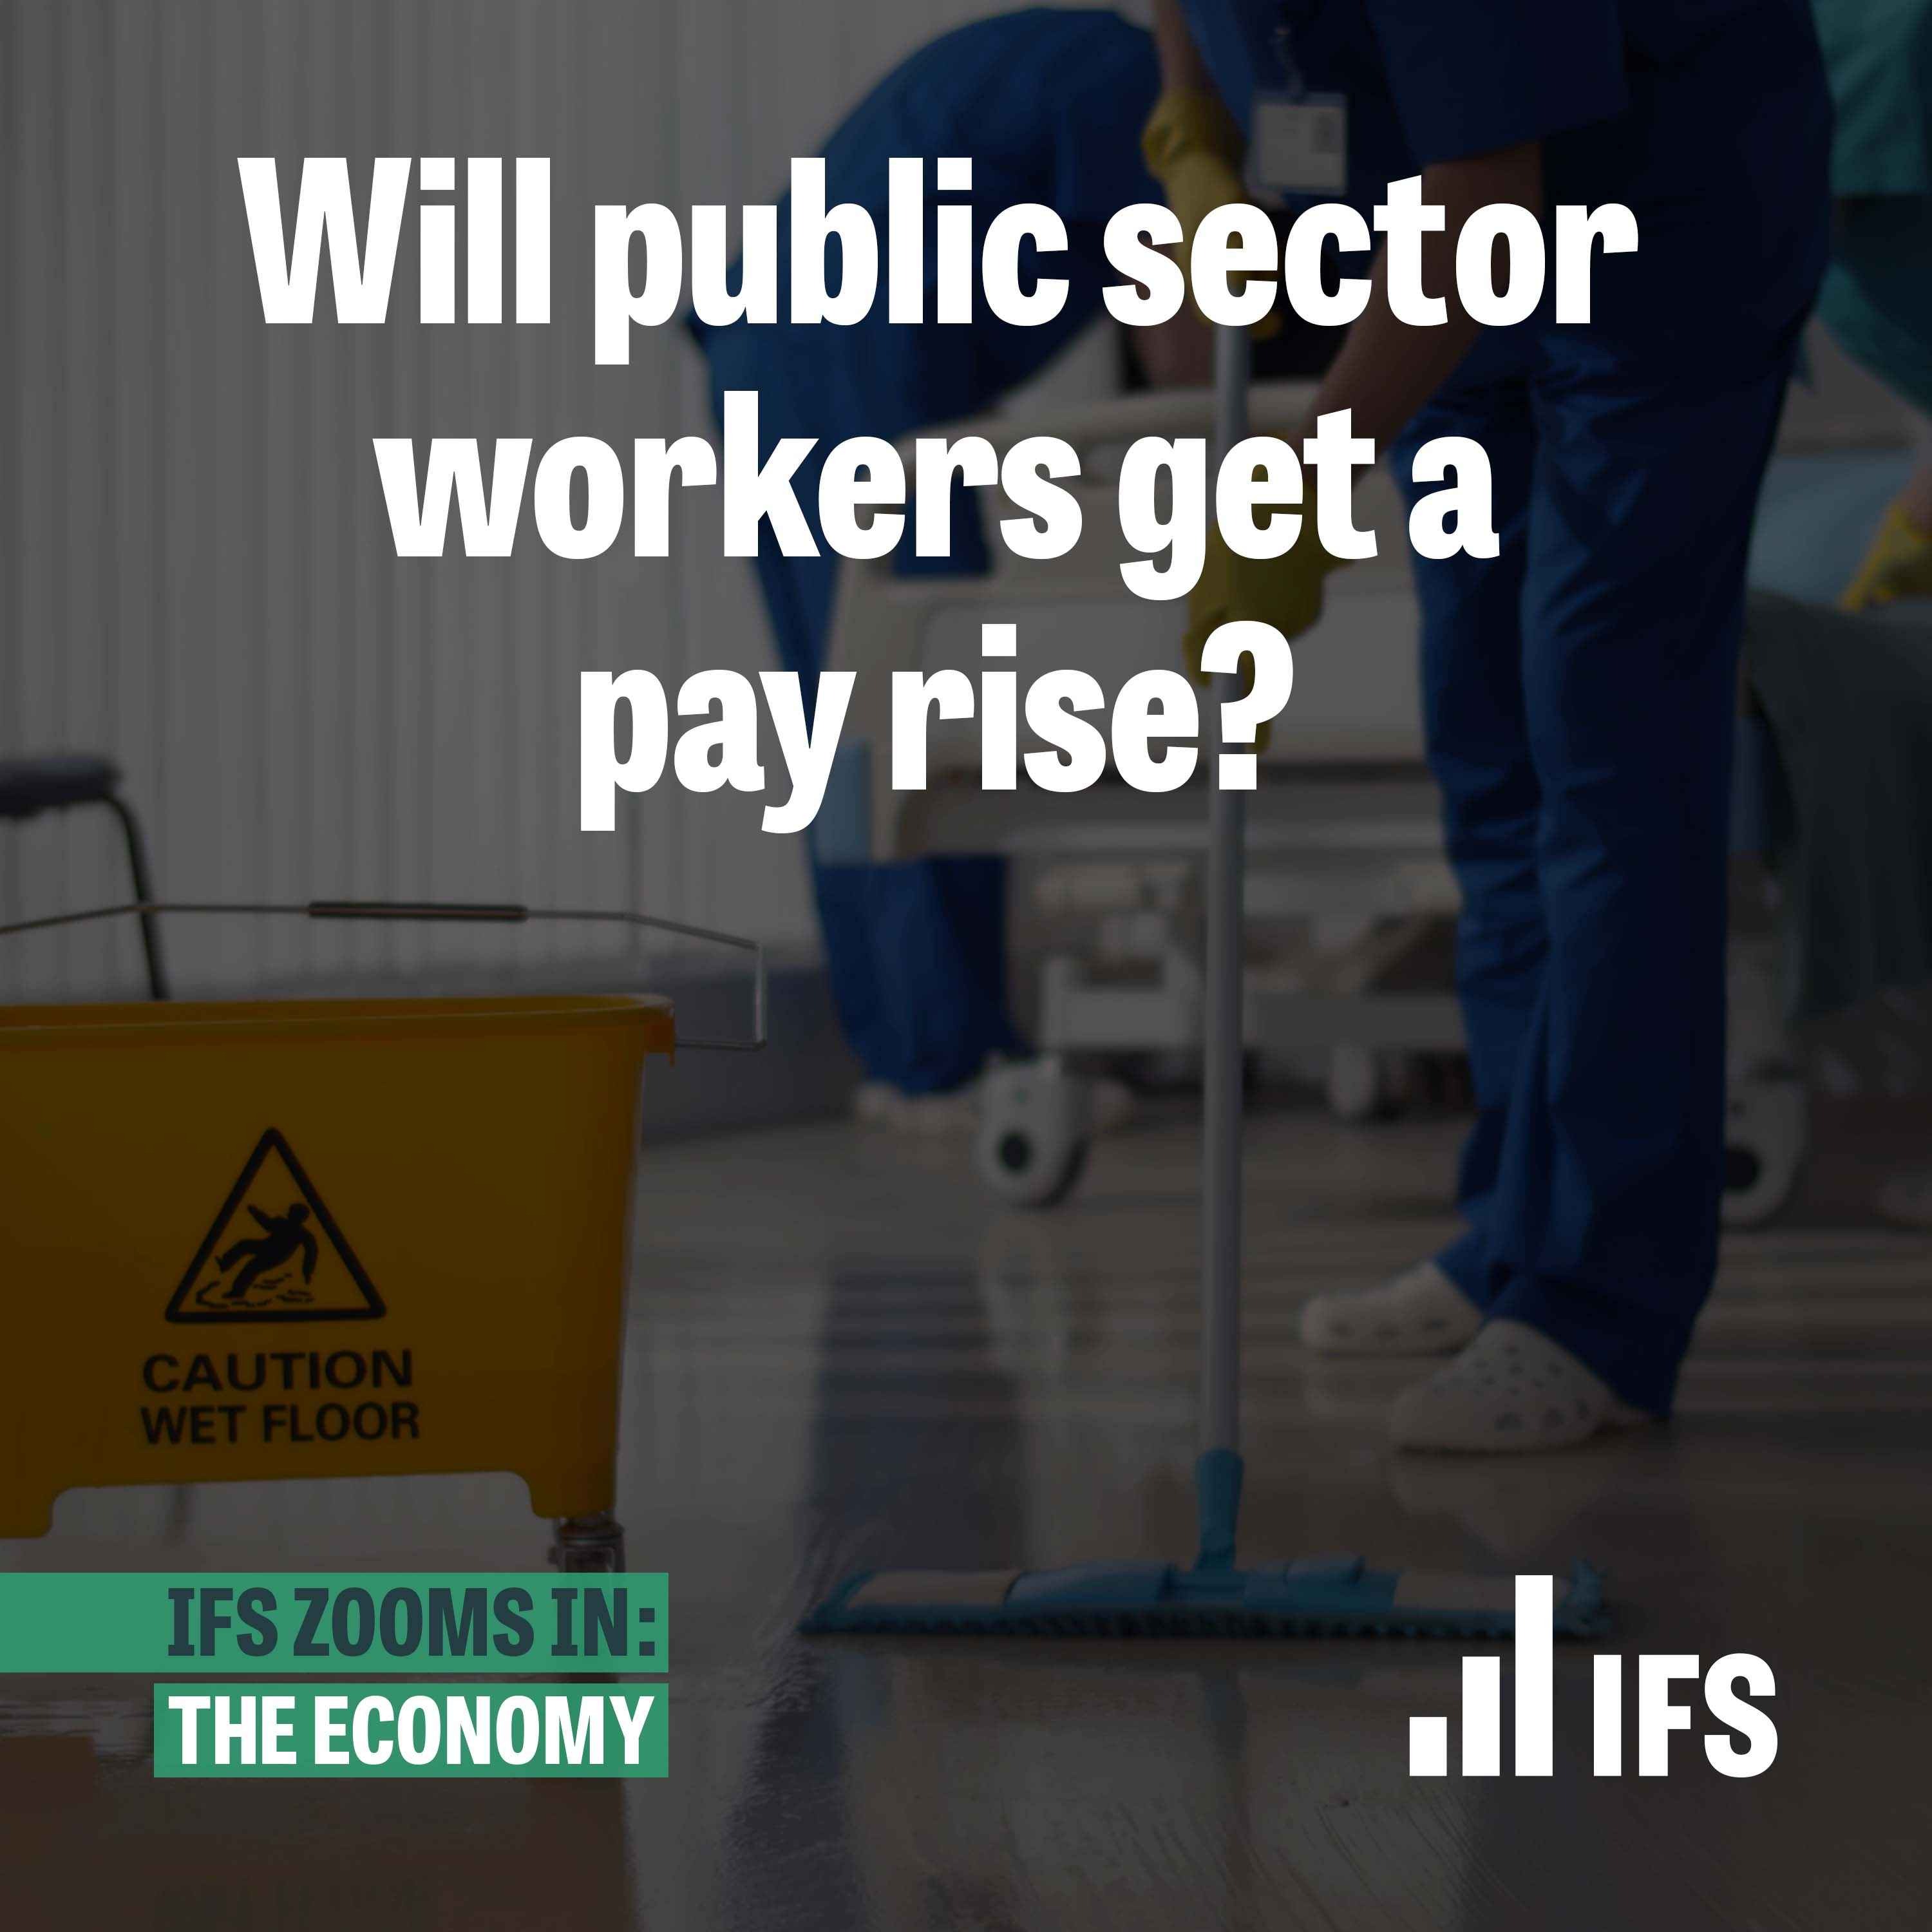 Will public sector workers get a pay rise?